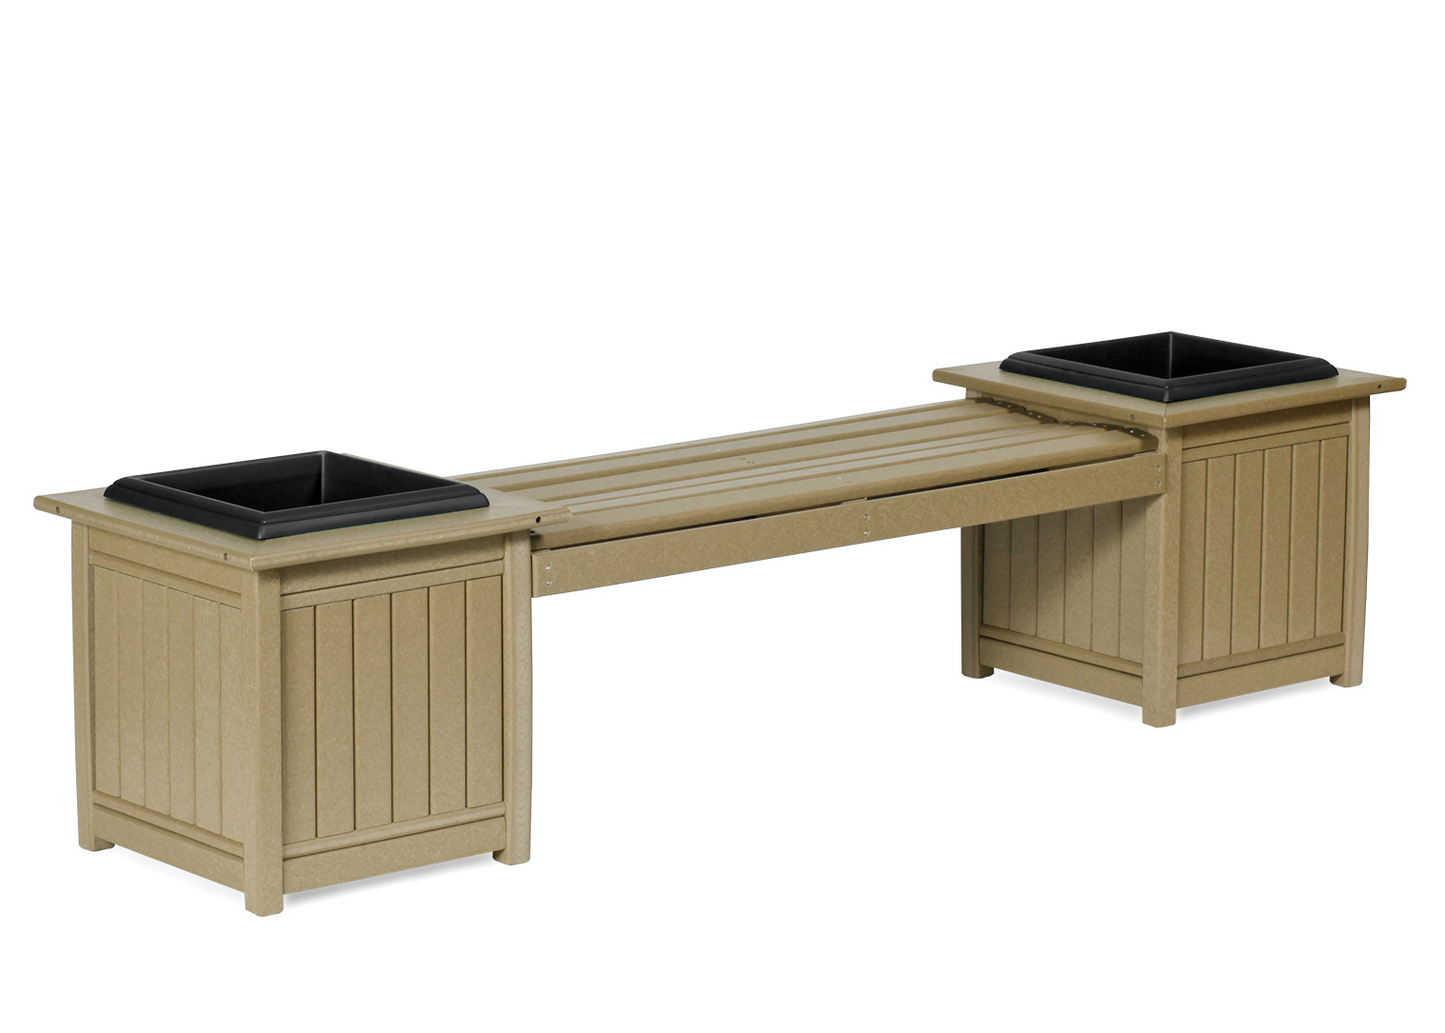 Leisure Lawns Amish Made Recycled Plastic Planter Bench Model #950 - LEAD TIME TO SHIP 4 WEEKS OR LESS